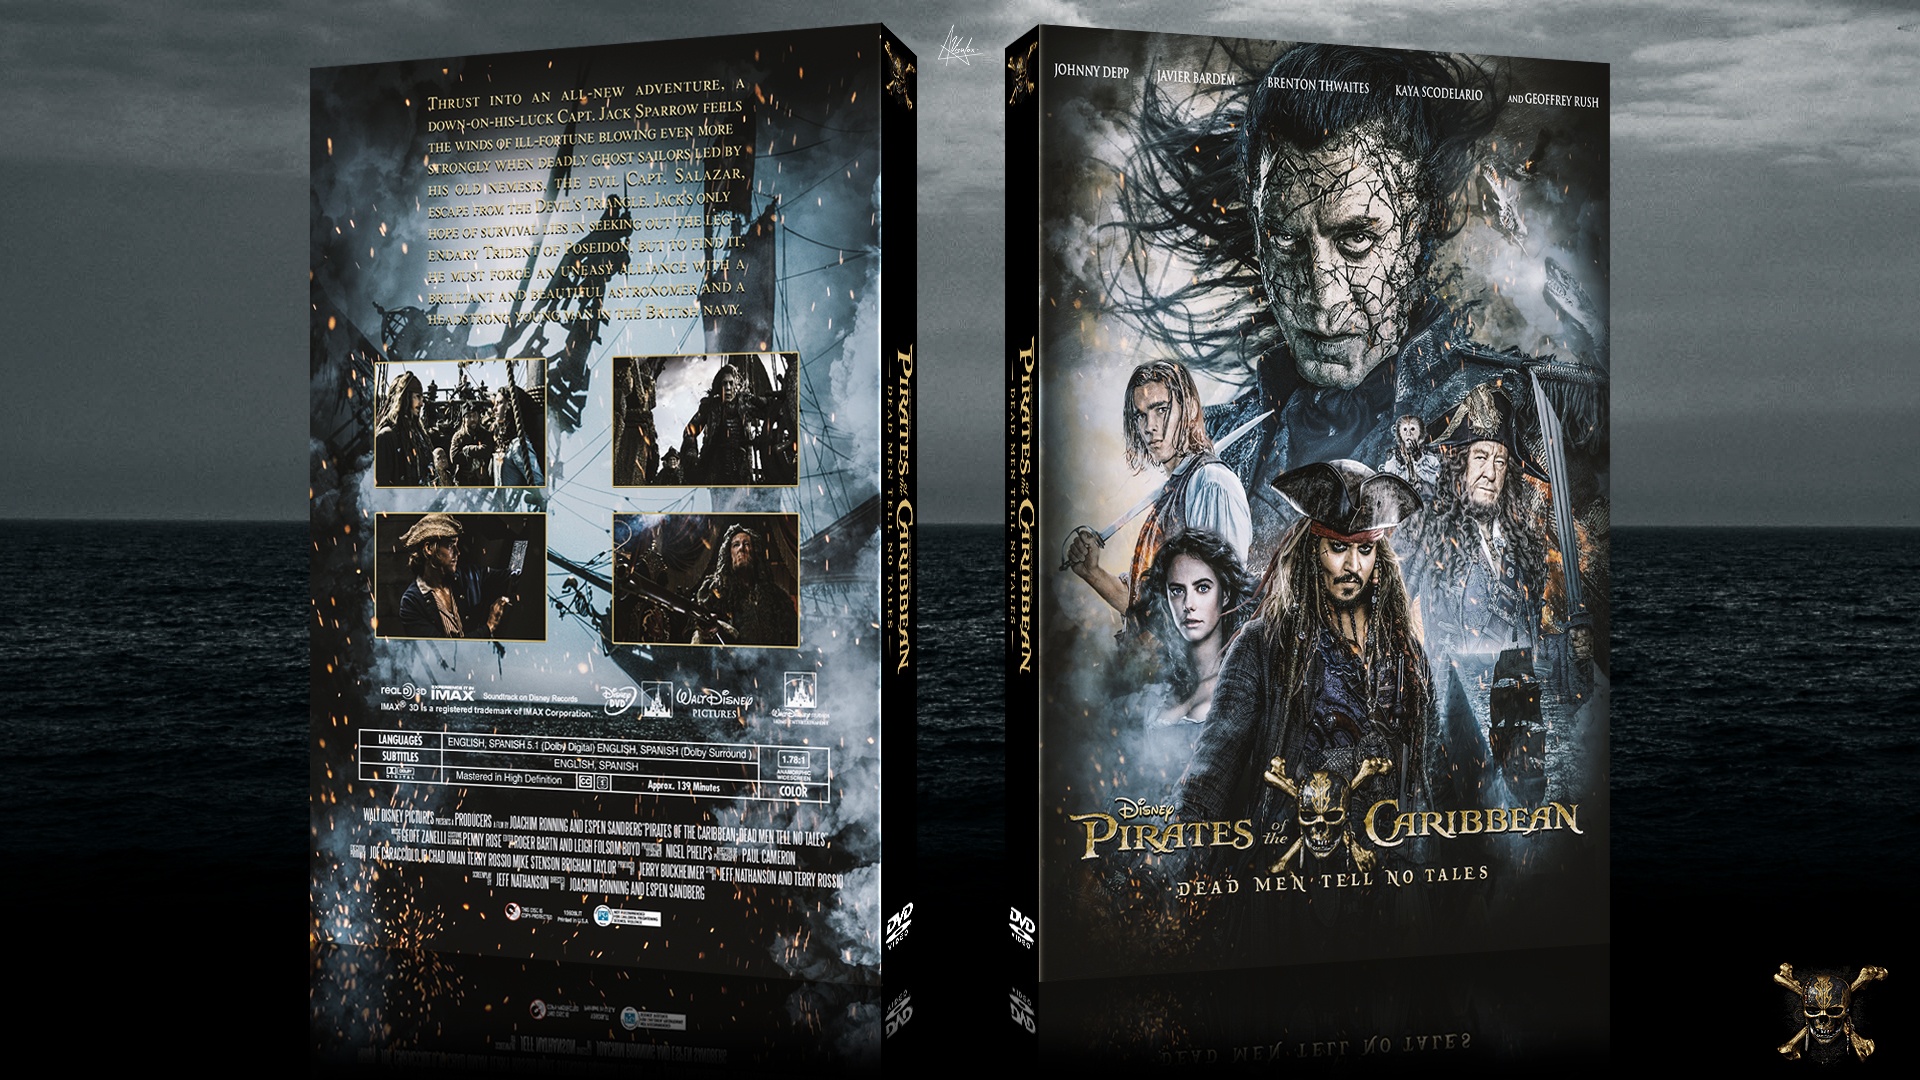 Pirates of the Caribbean: Dead Men Tell No Tales box cover